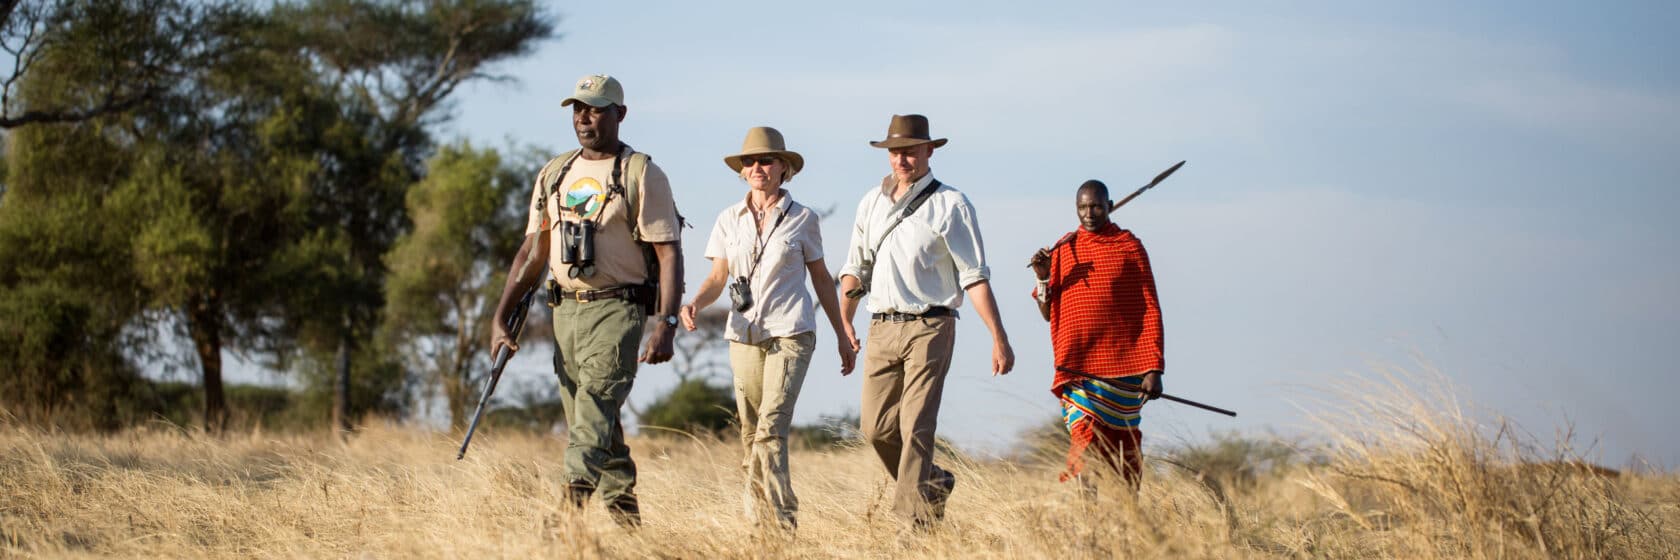 A group of people on a safari.